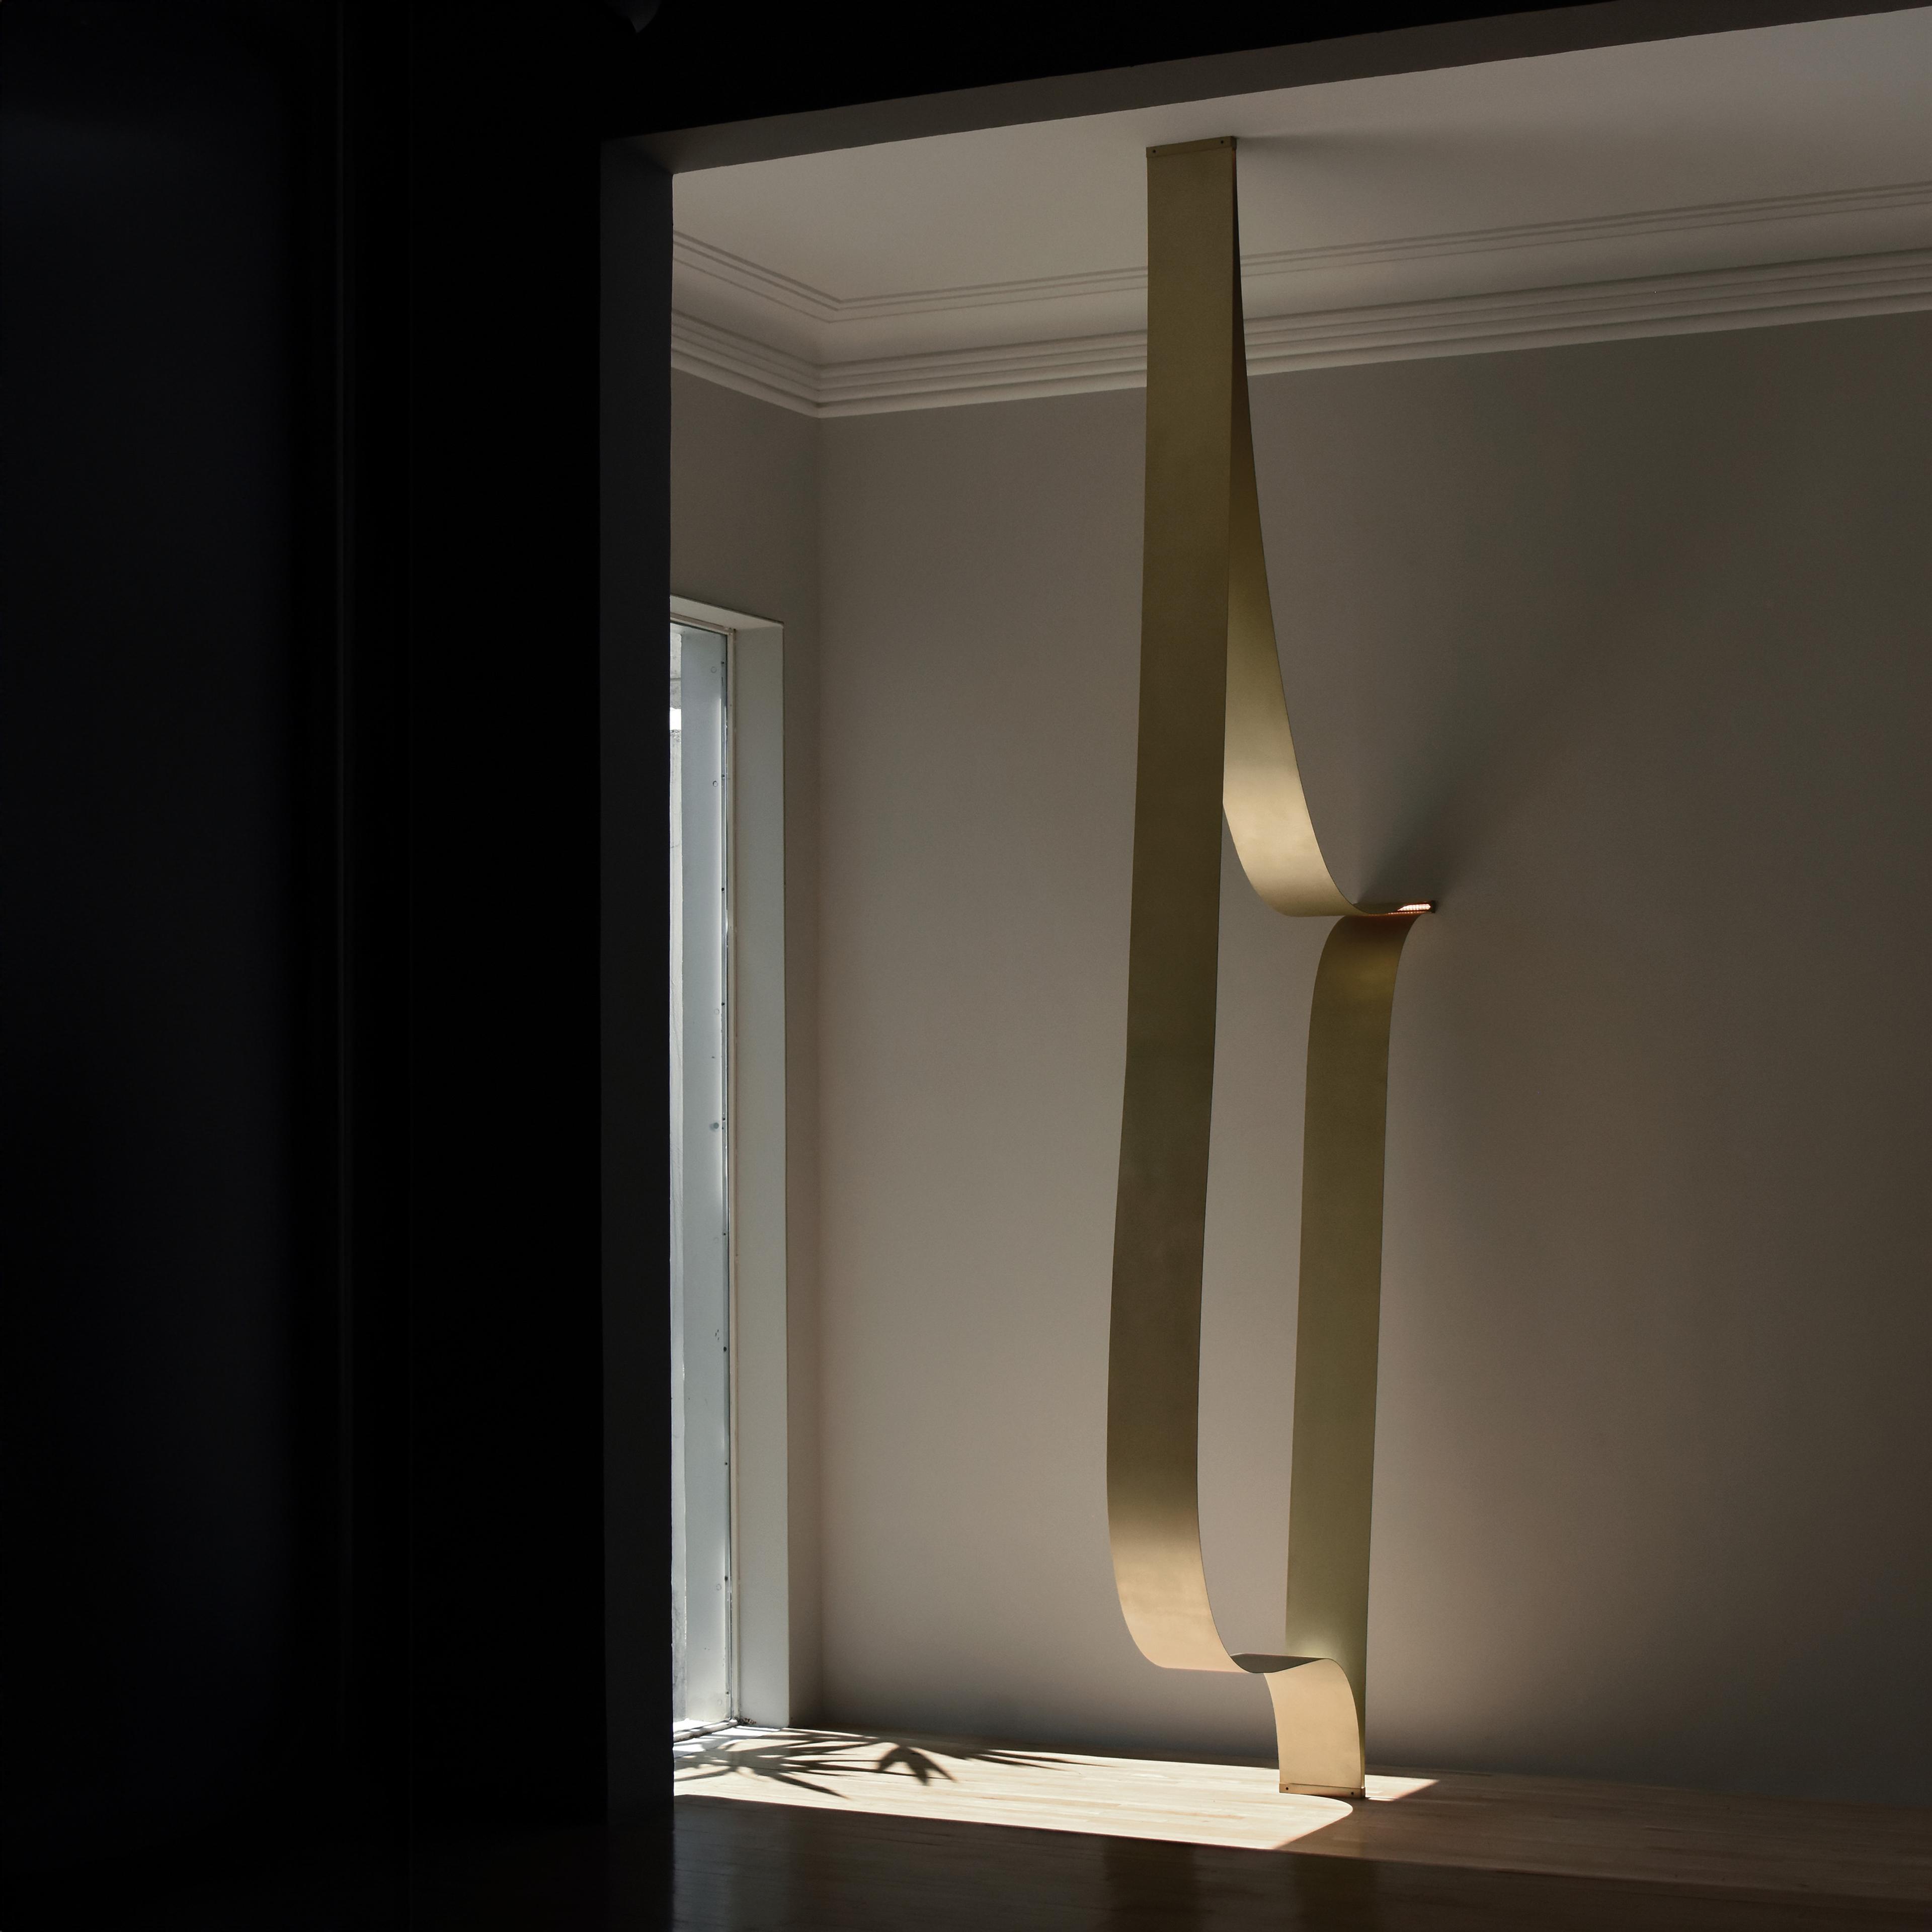 Hector Esrawe Ateliers Courbet Parabola Lights Series